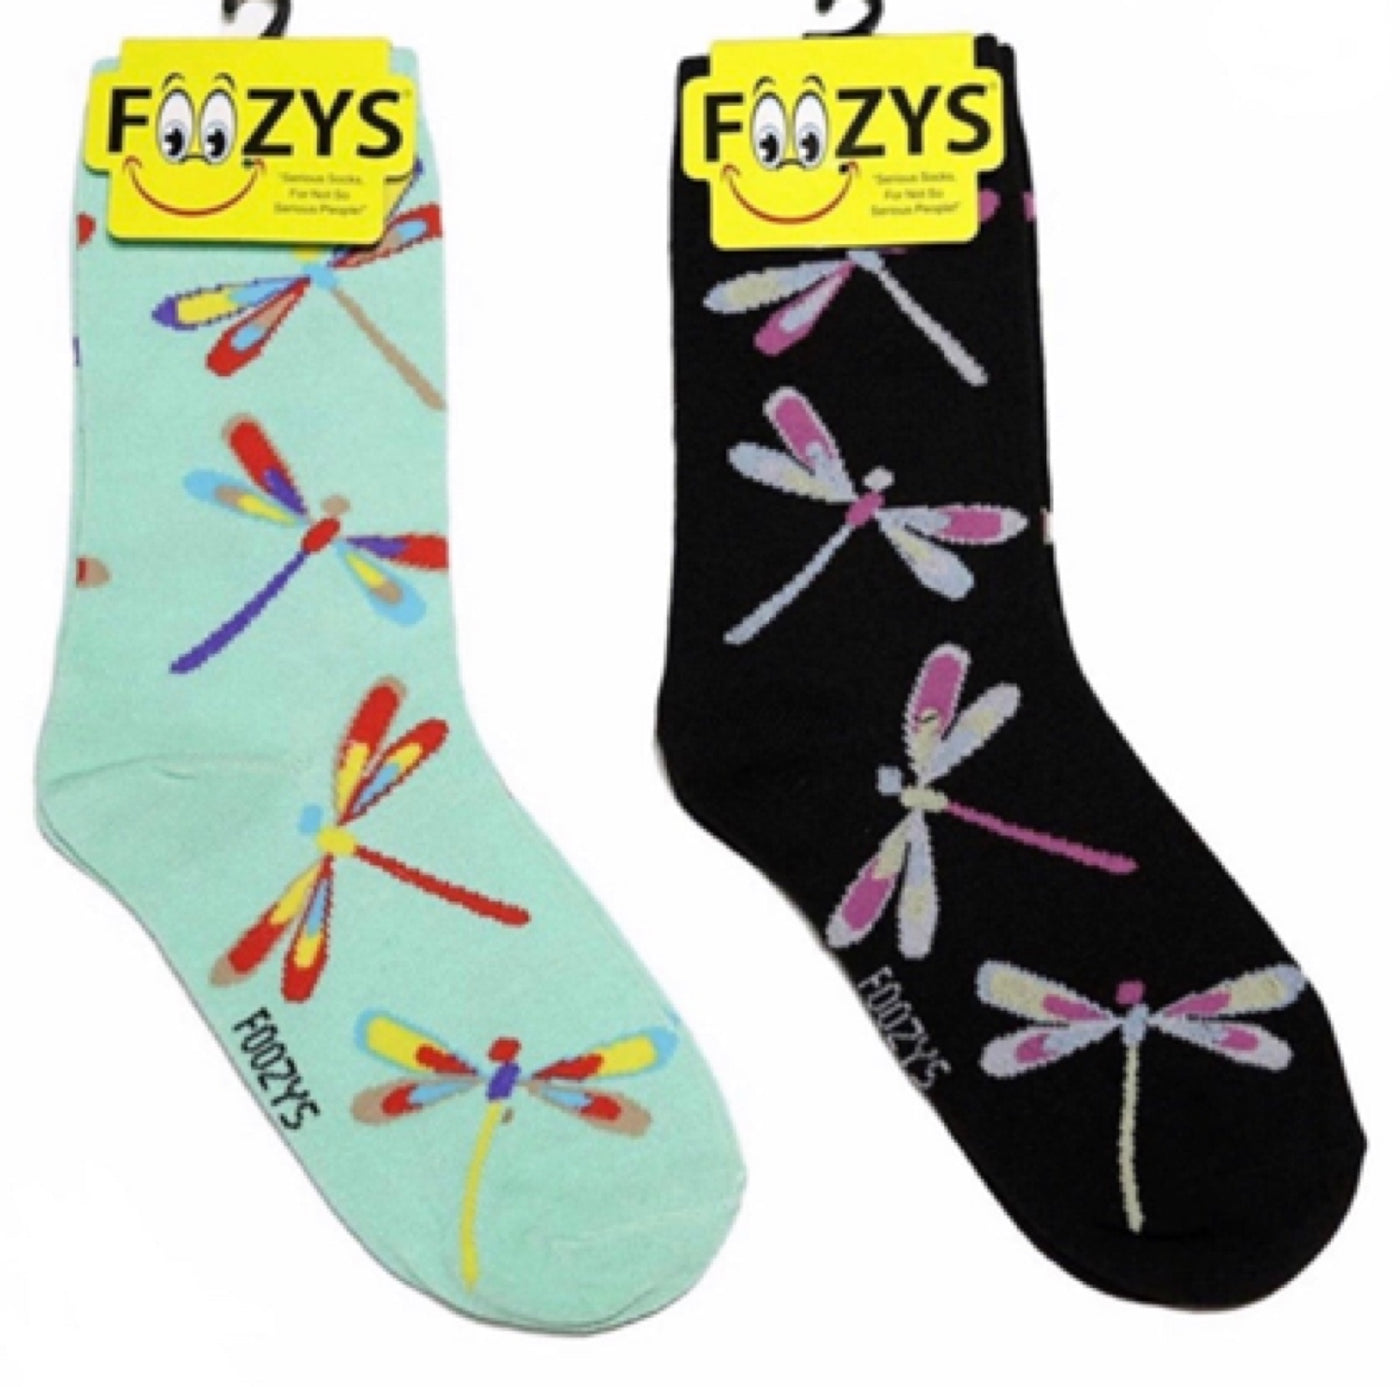 FOOZYS BRAND Ladies 2 Pair Of DRAGONFLY Socks DRAGONFLIES ALL OVER